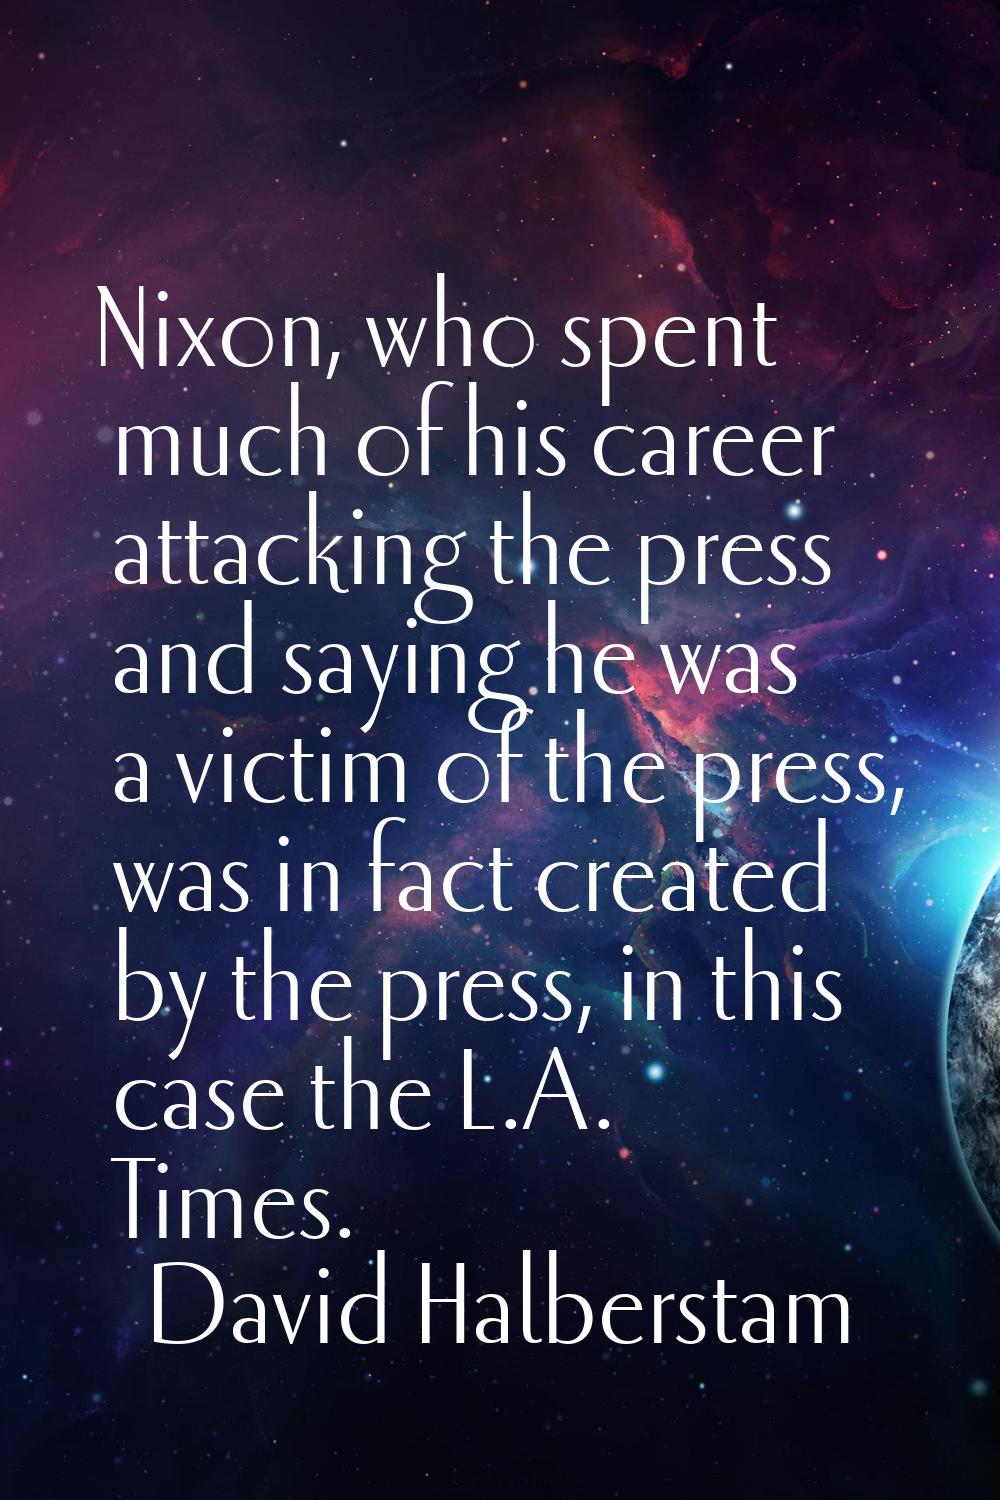 Nixon, who spent much of his career attacking the press and saying he was a victim of the press, wa